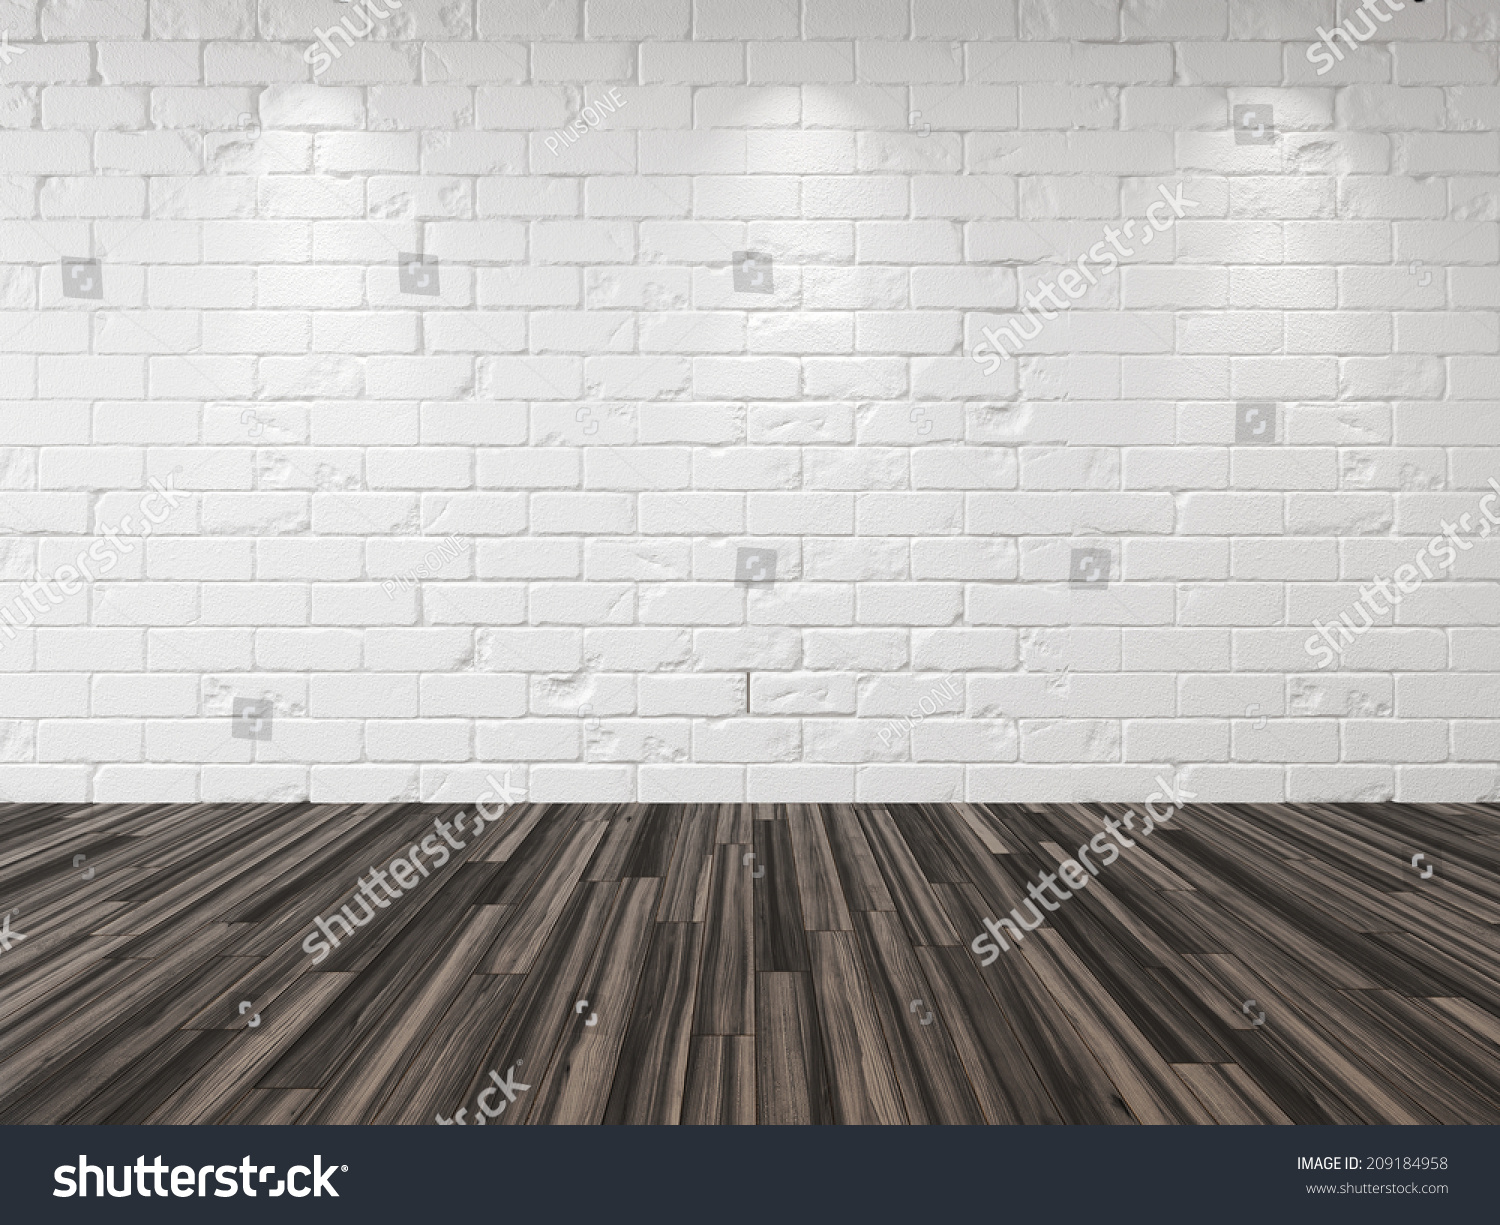 Empty Whitewashed Brick Room With Recessed Down Lights Illuminating The ...